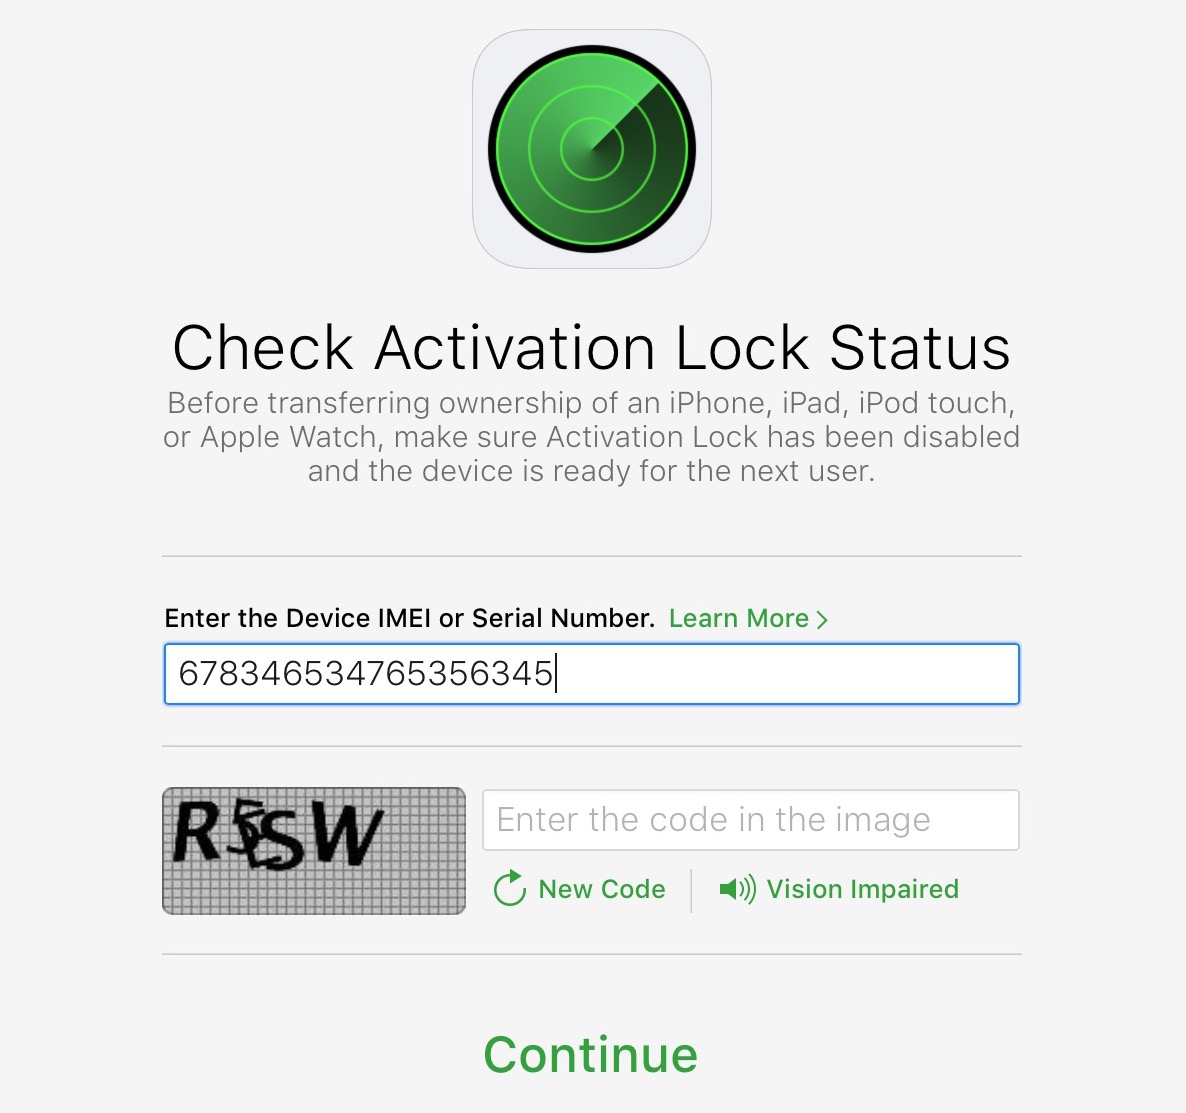 How to check Activation Lock status of your iPhone or iPad